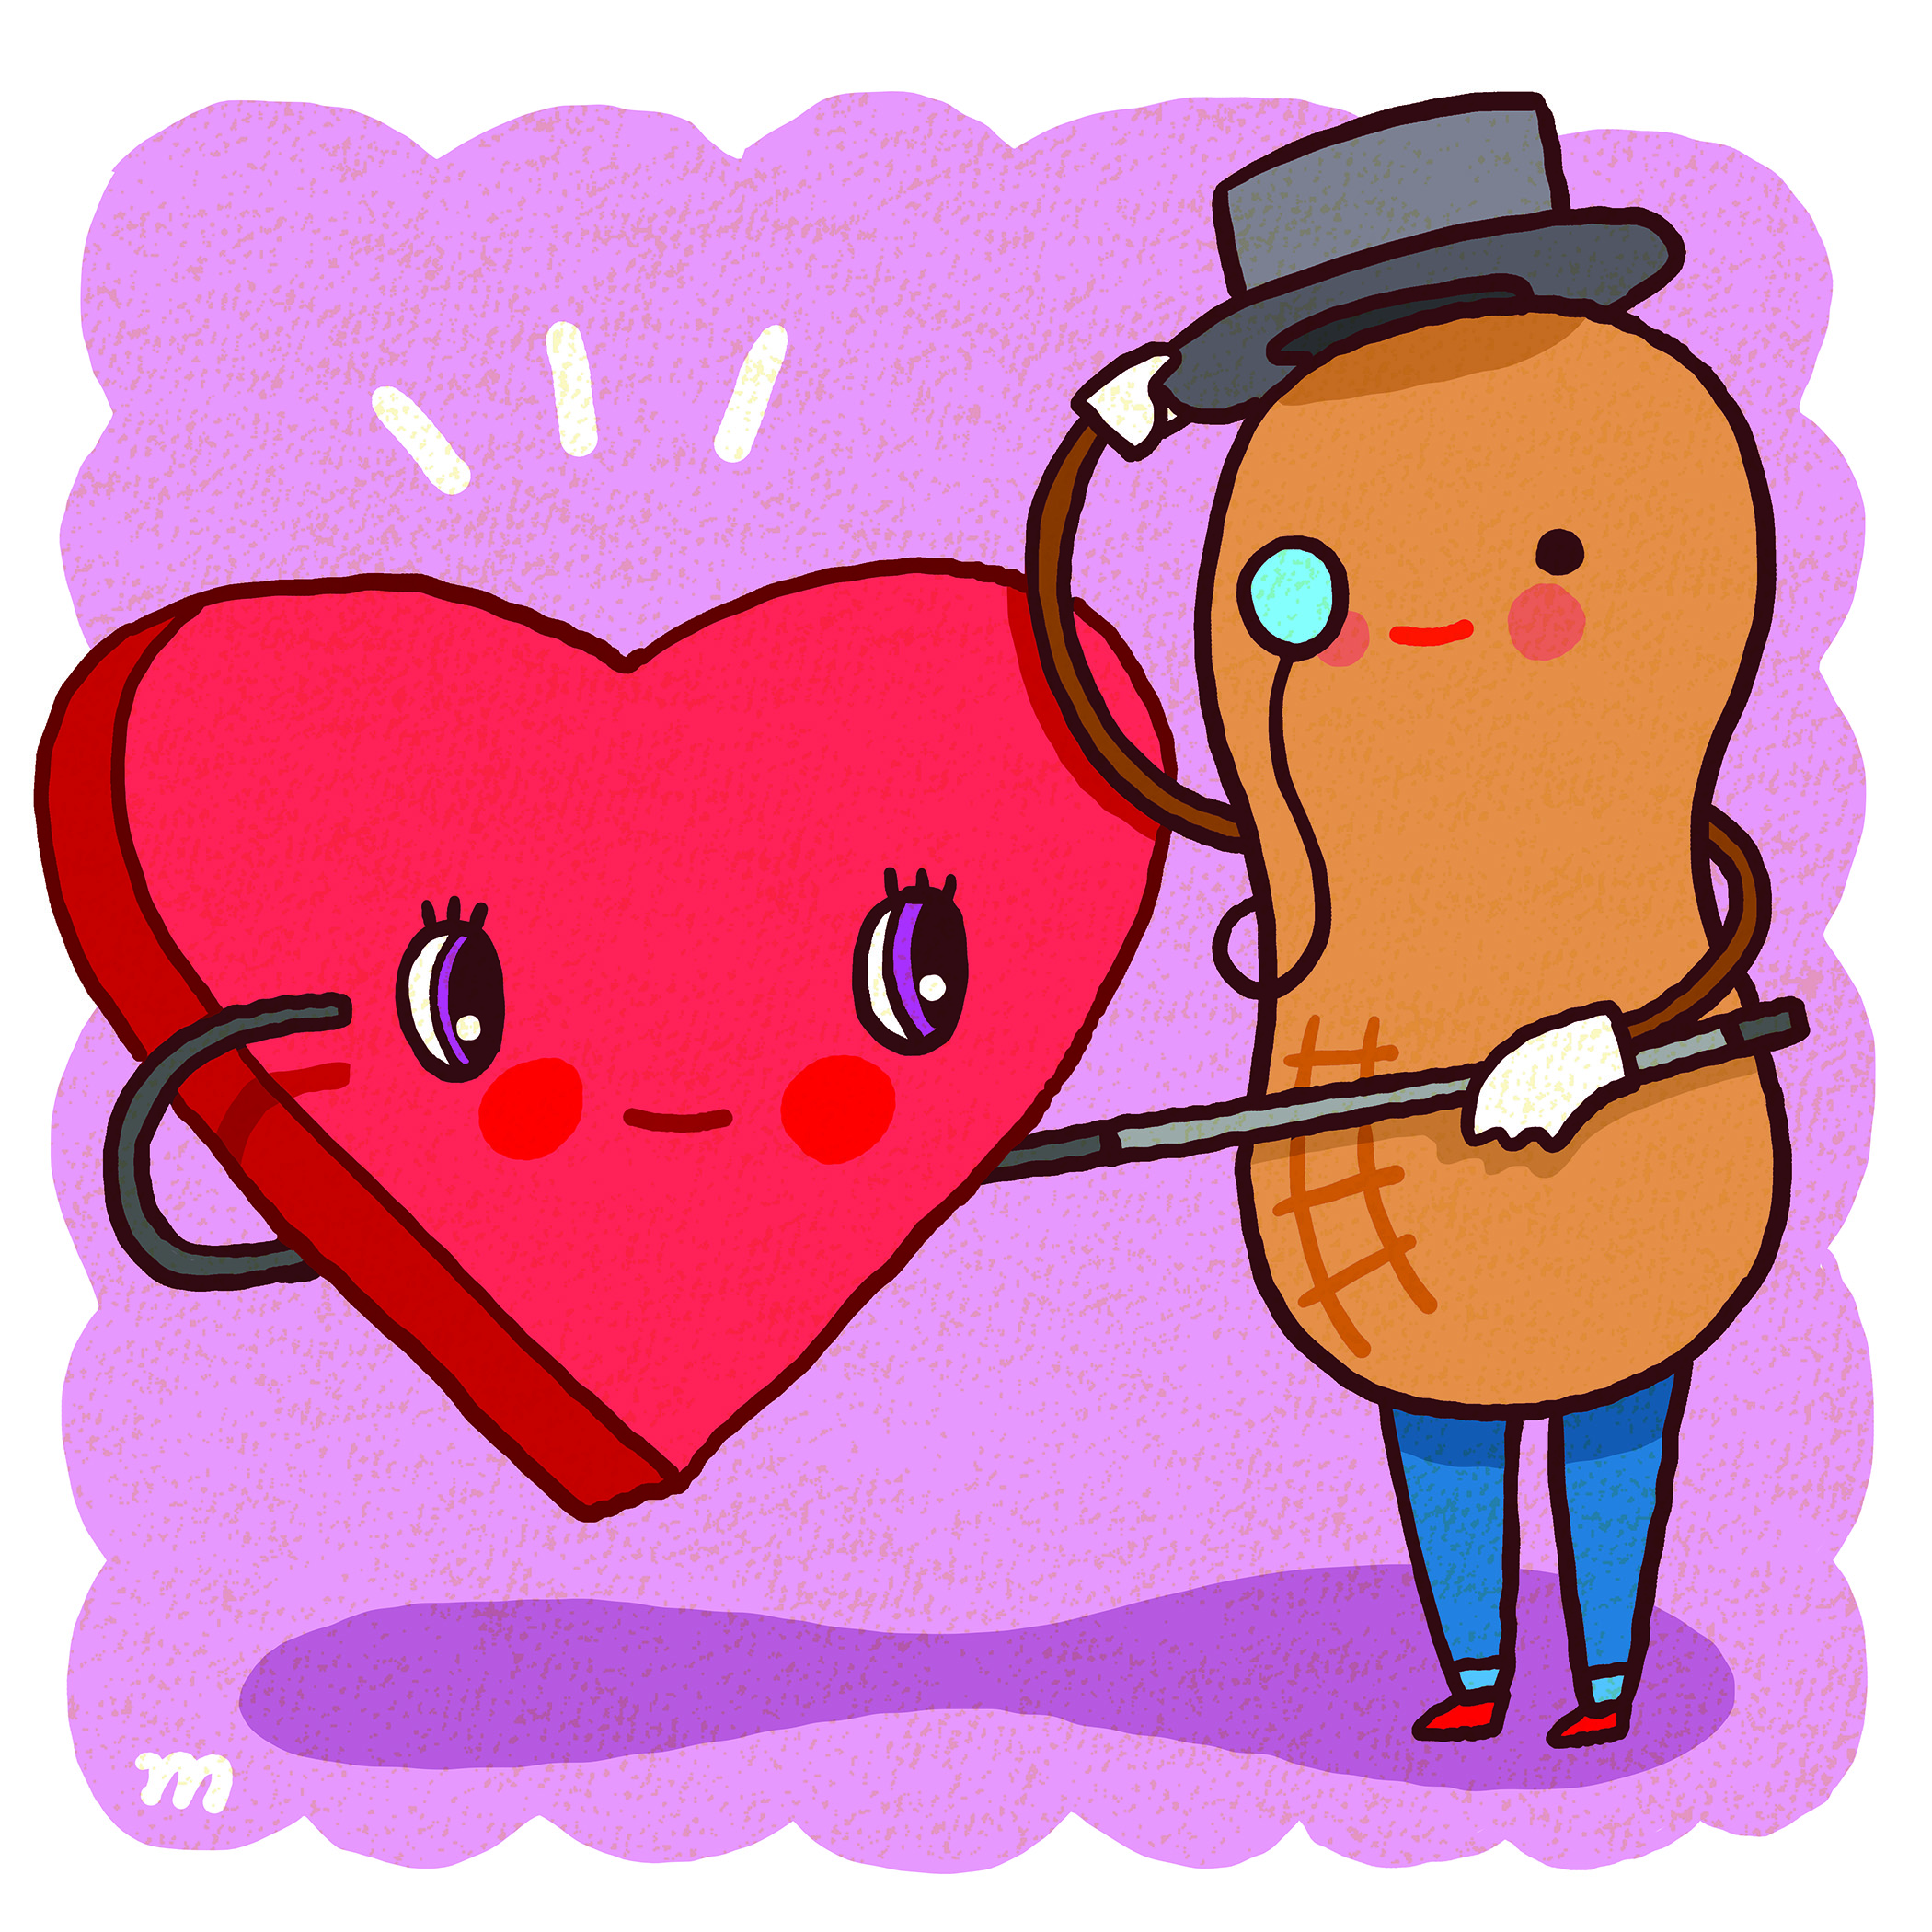 illustration of a peanut and a heart by Aaron Meshon